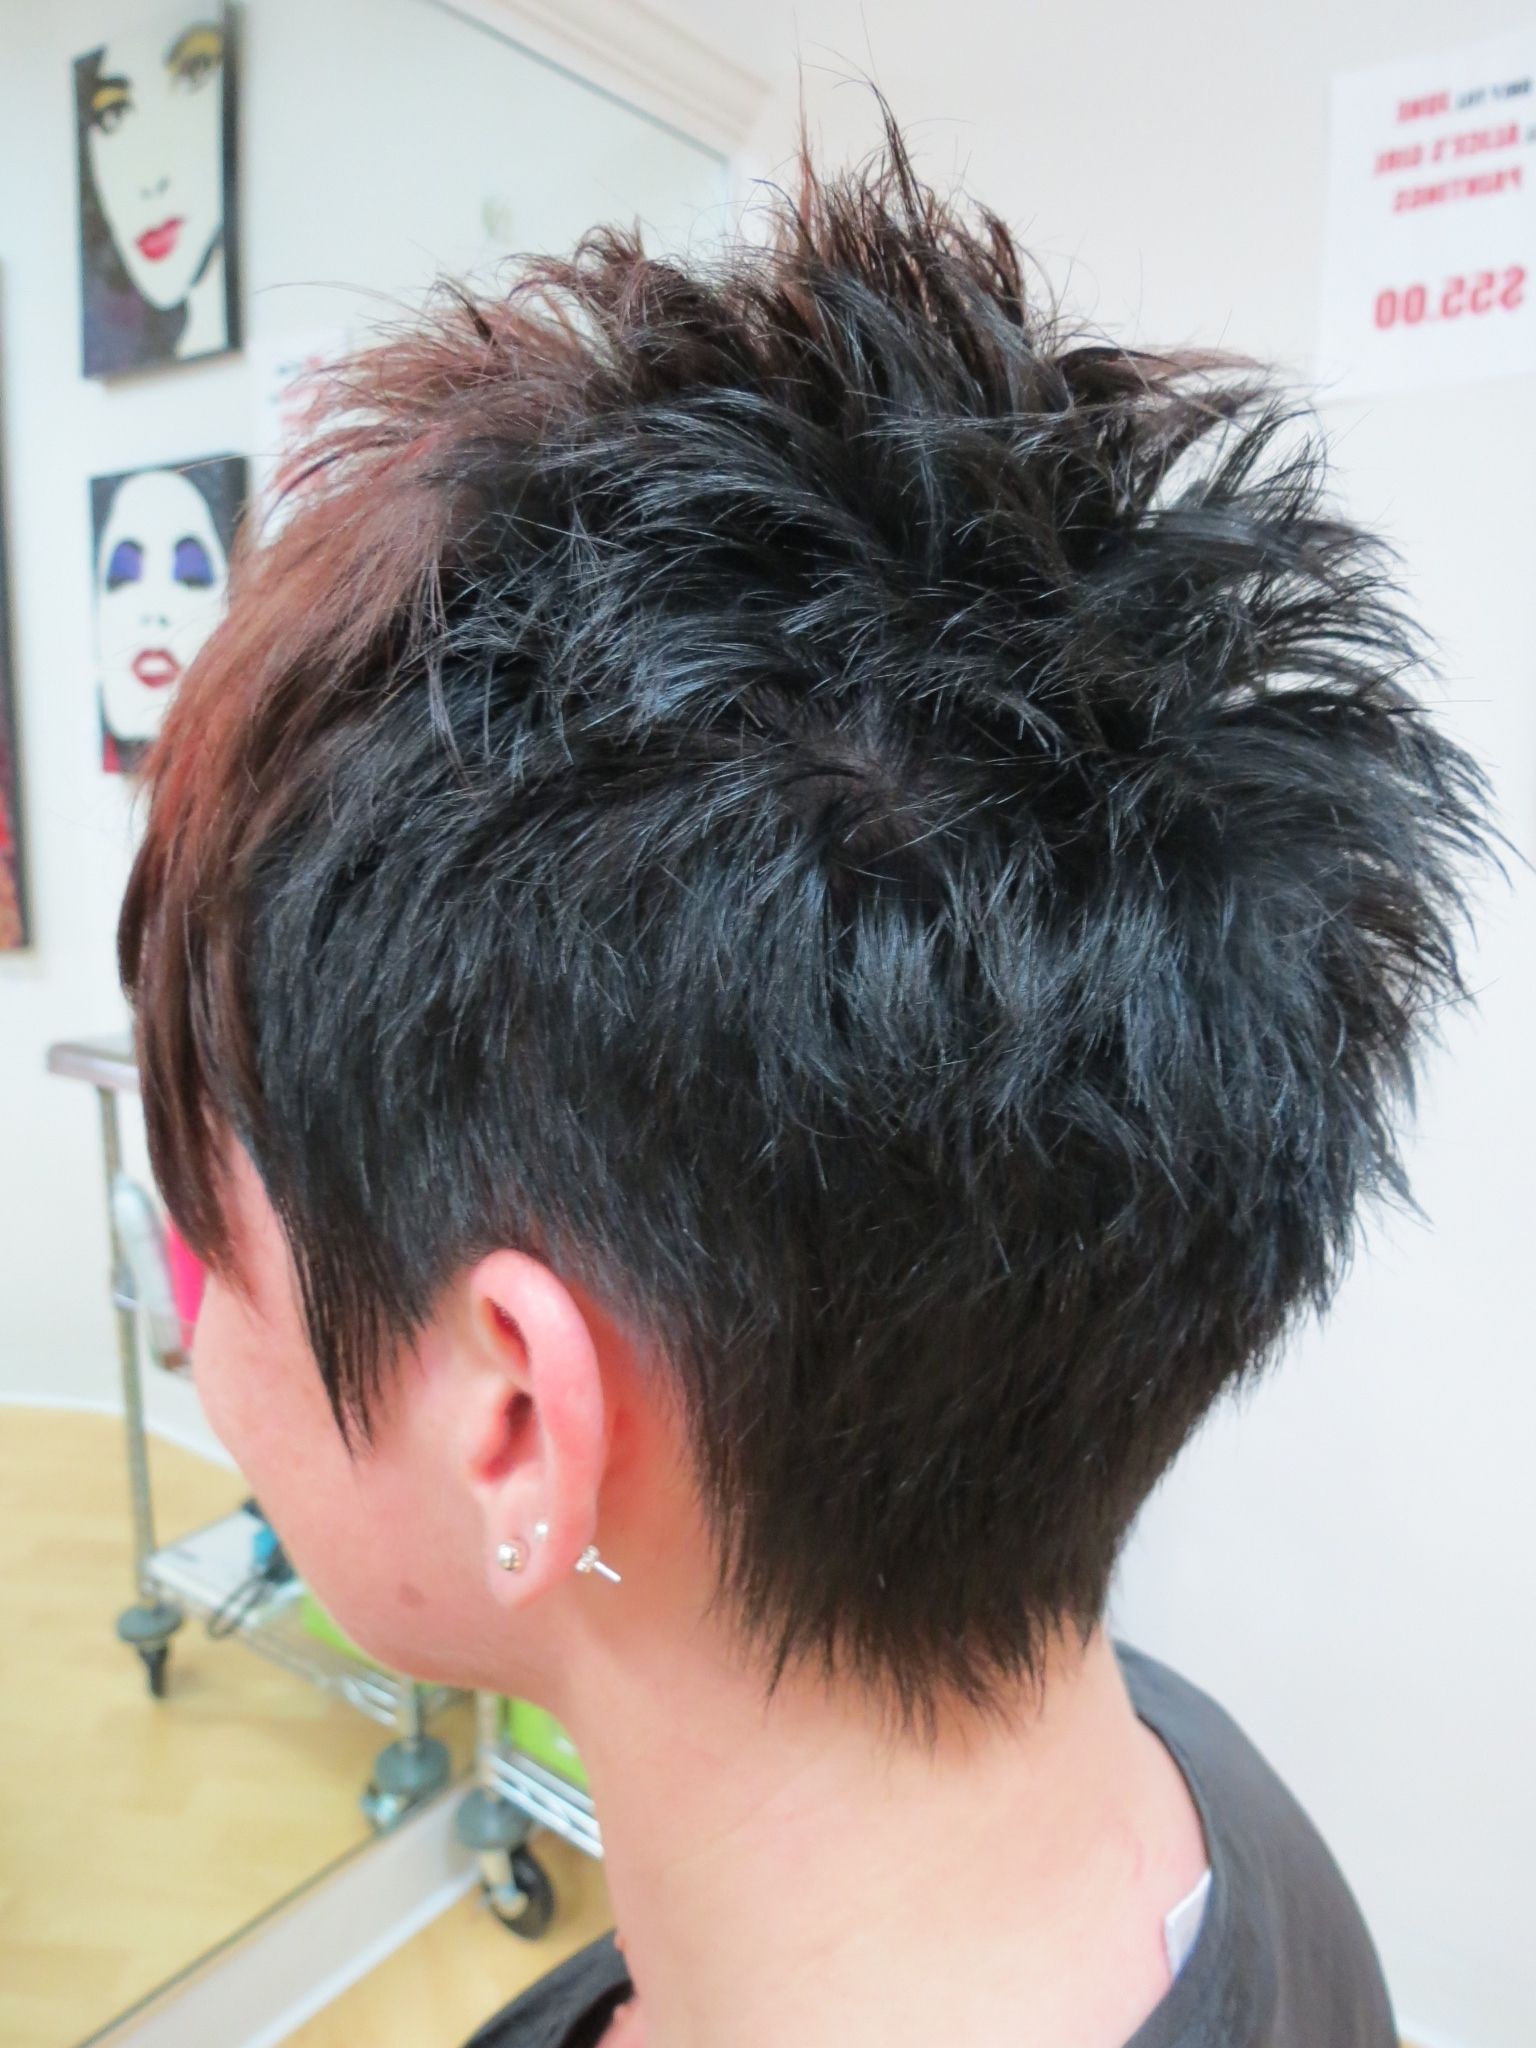 Back View Of Short Pixie Haircuts – Hairstyles Ideas Pertaining To Recent Short Spiky Pixie Hairstyles (View 8 of 15)